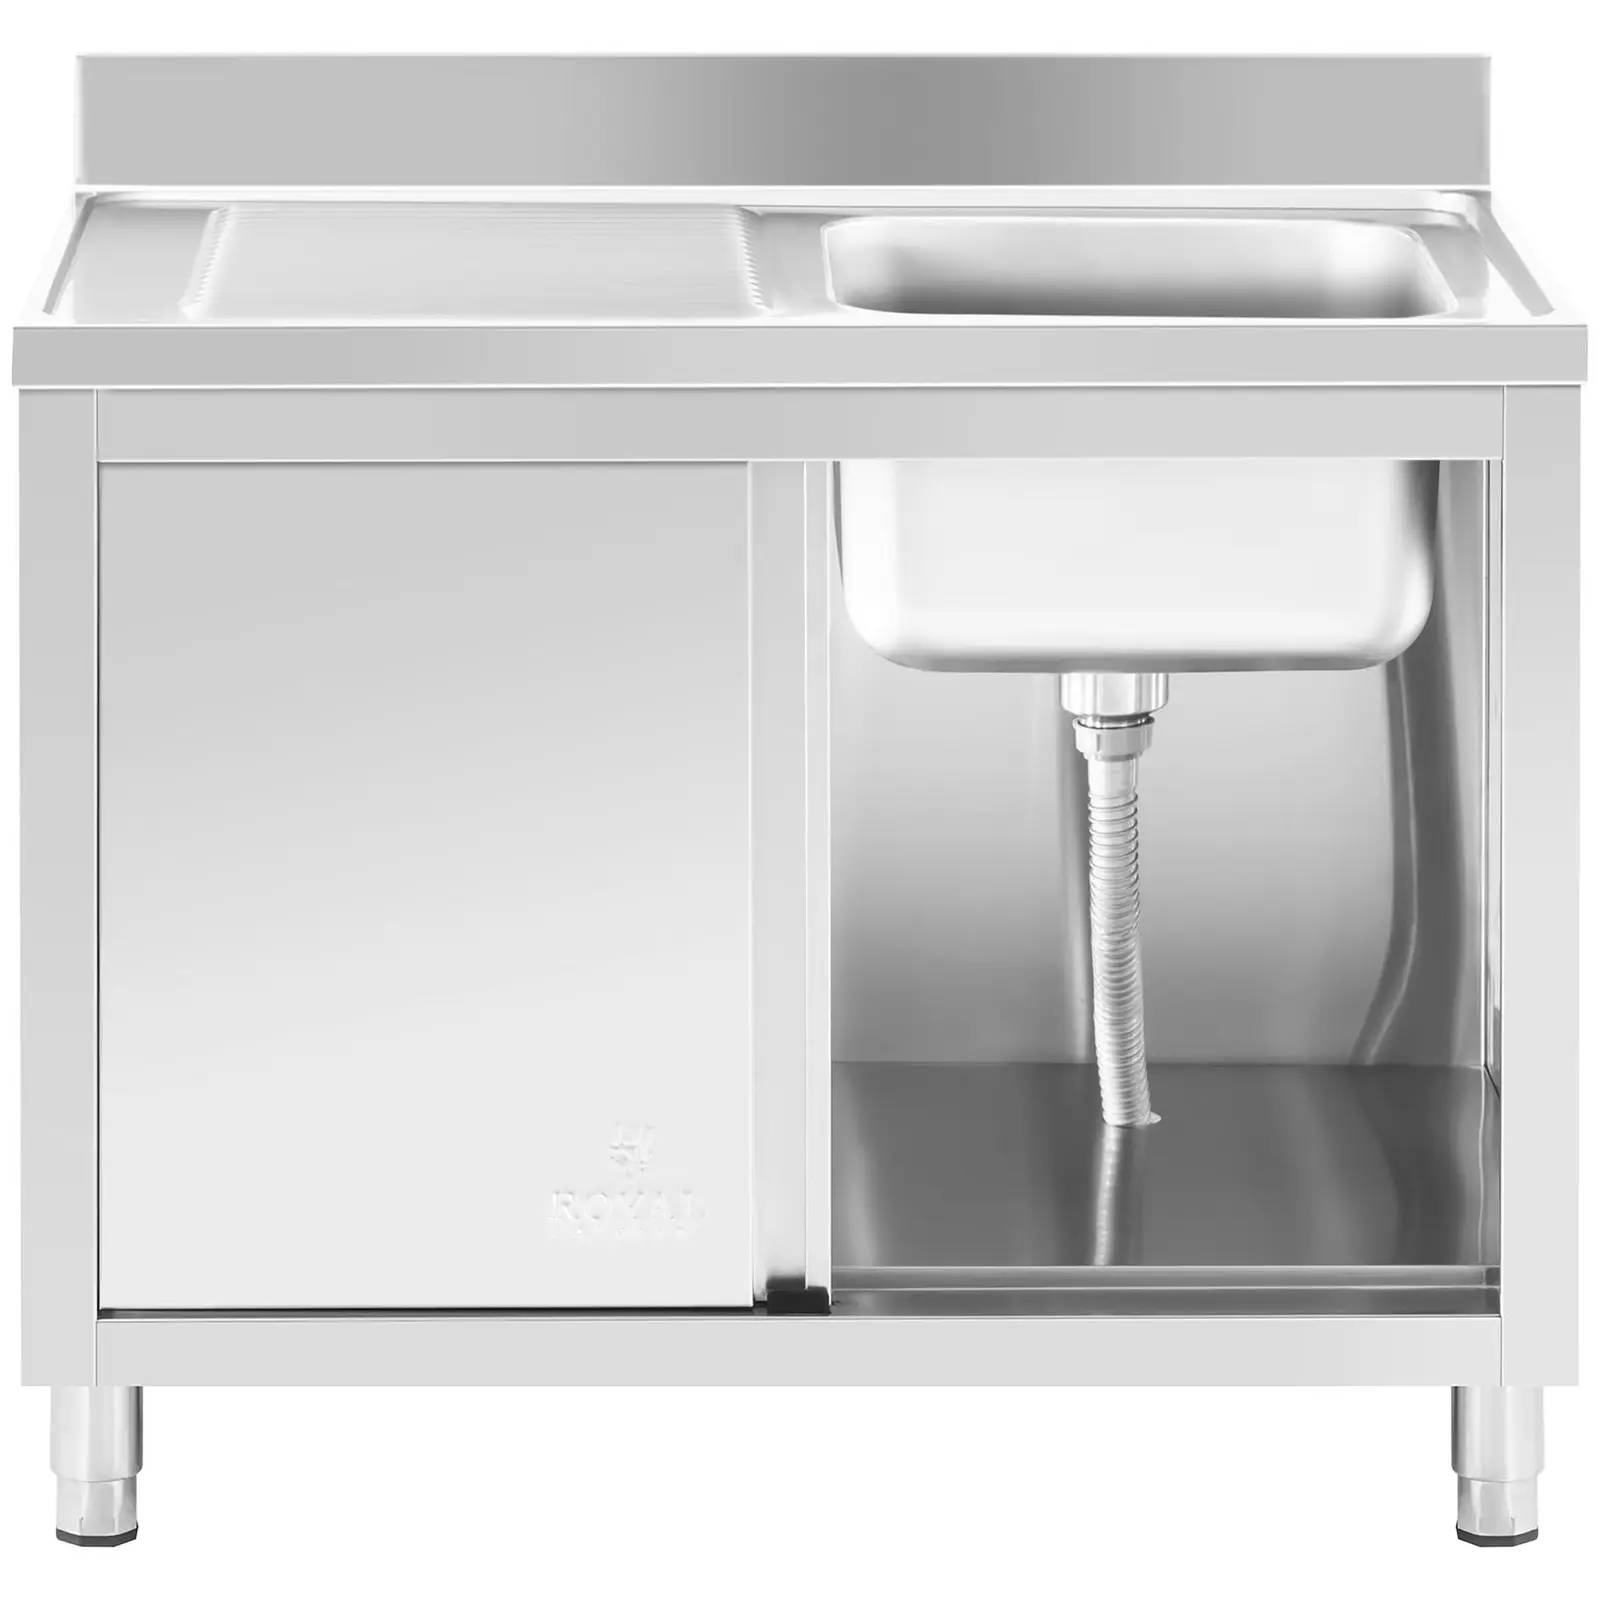 Commercial Sink Unit - 1 basin - Royal Catering - Stainless steel - 400 x 400 x 240 mm